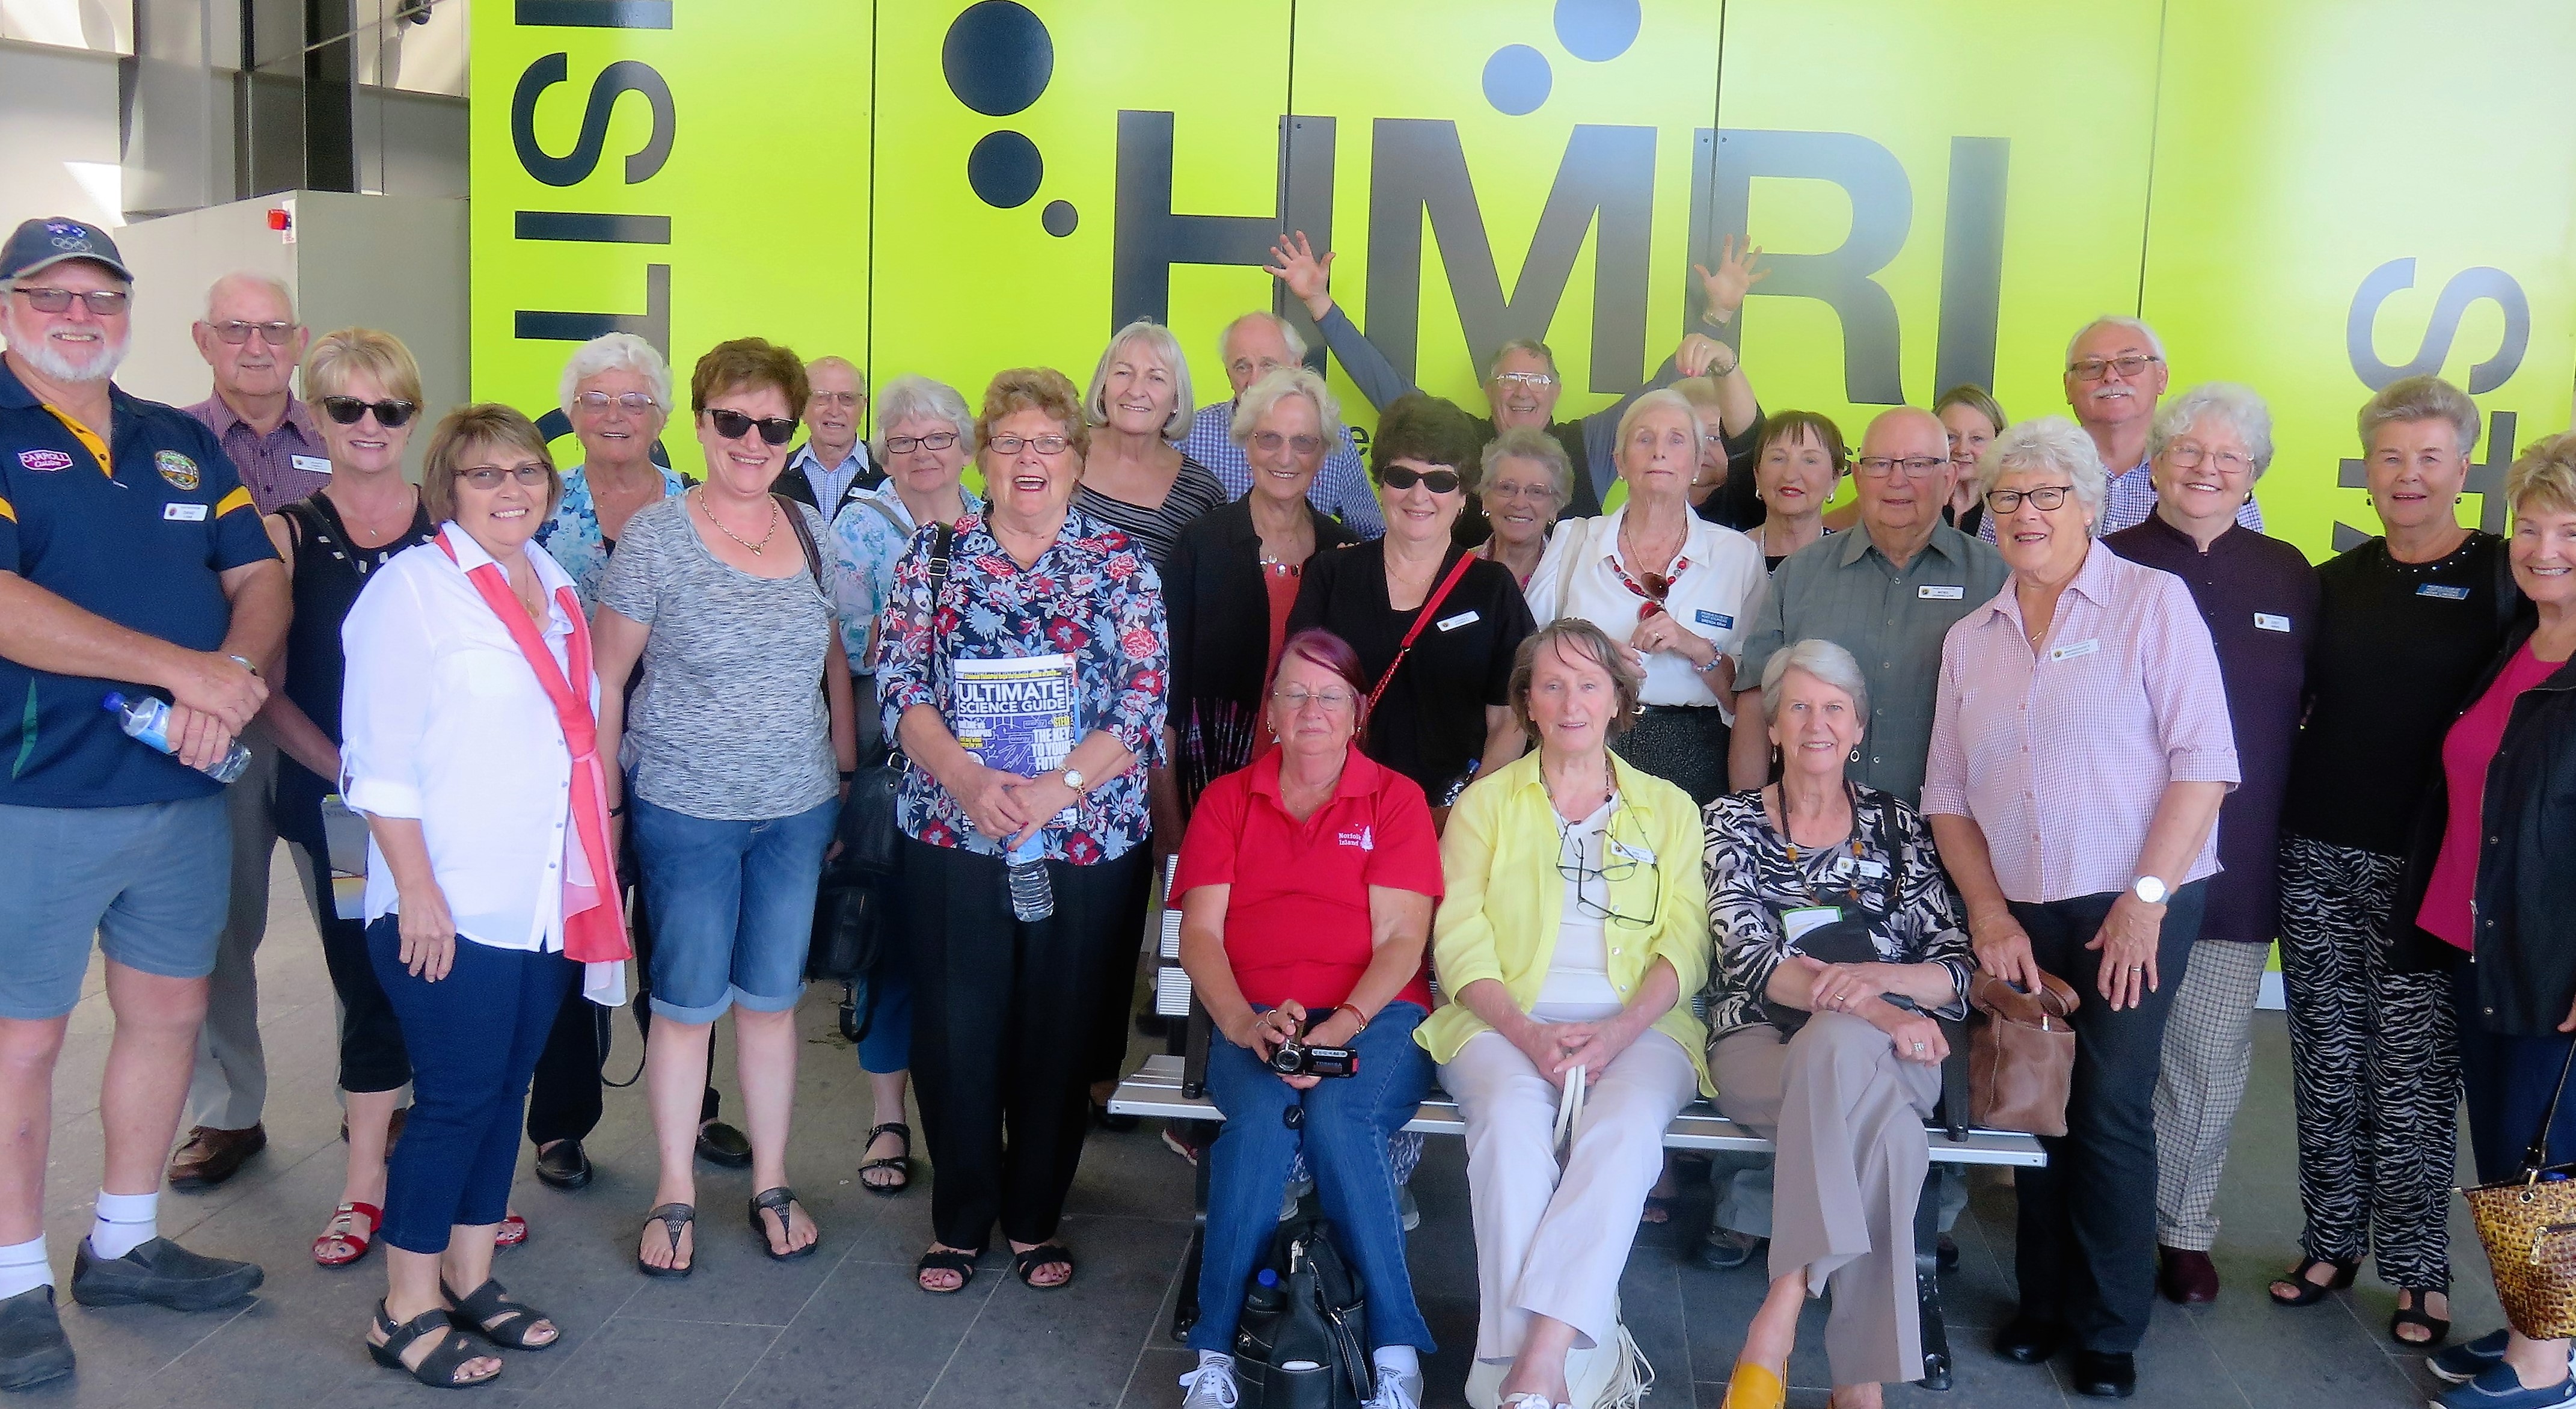 Port Stephens Probus Club members and Staff at HRMI meet (Photo: Courtesy of Anne Gibson)